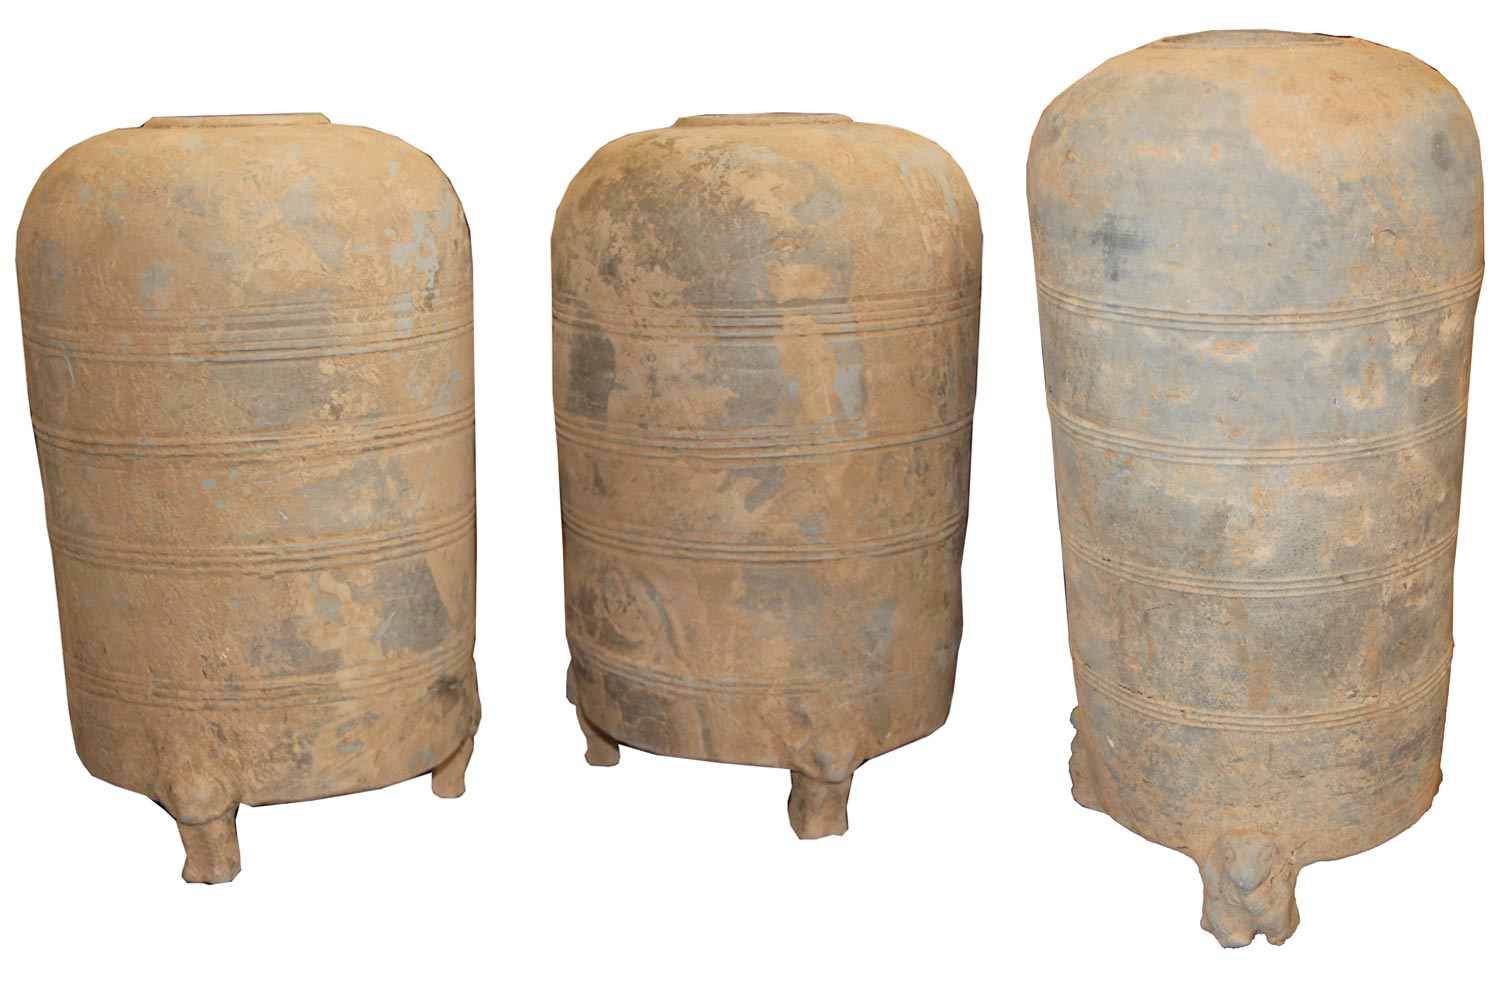 A Collection of Three Chinese Han Dynasty Earthenware Jars No. 4500